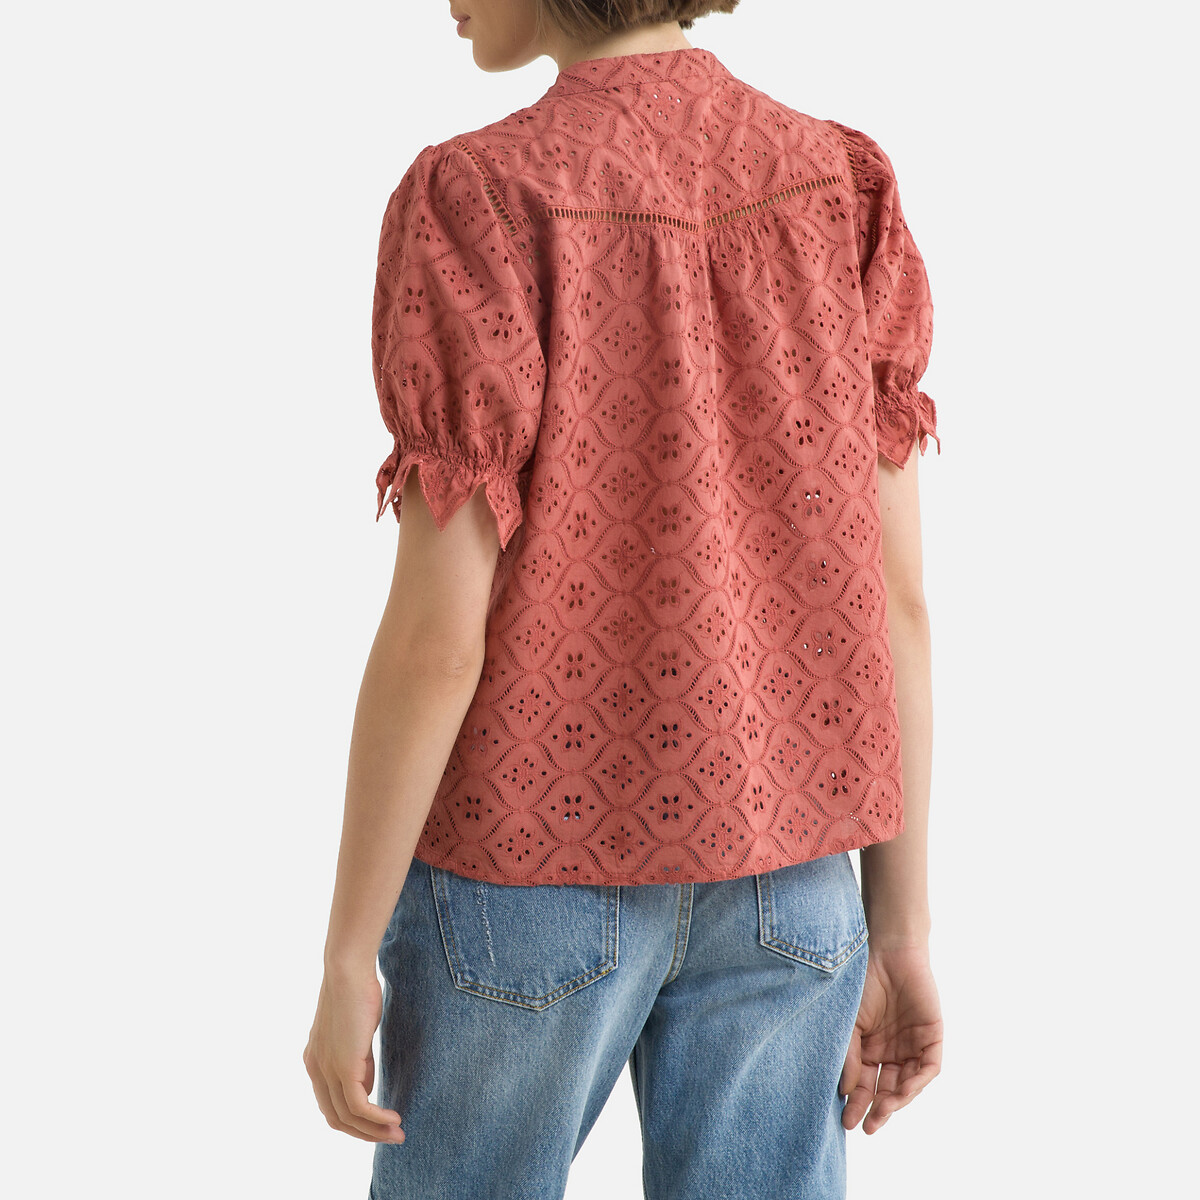 Birk Broderie Anglaise Blouse with Short Sleeves in Cotton